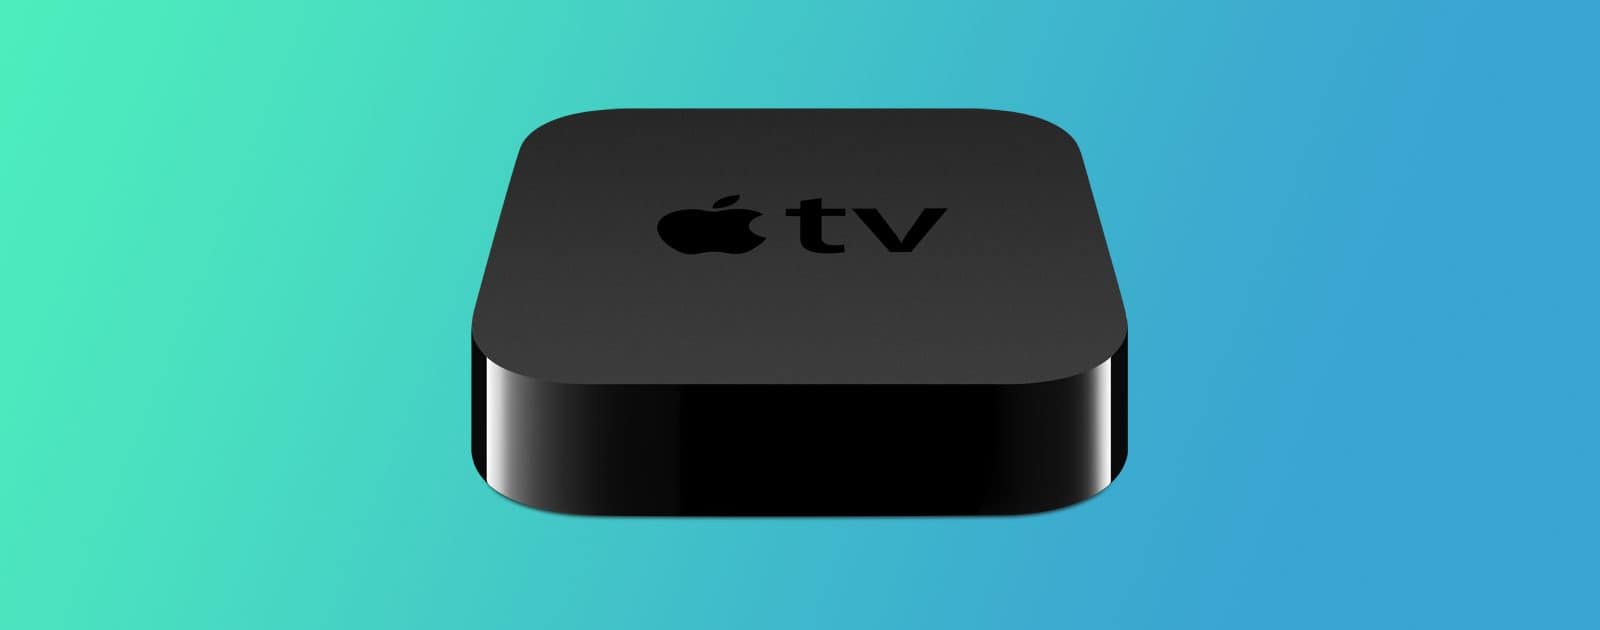 Charter Spectrum App Rolls Out to Apple TV